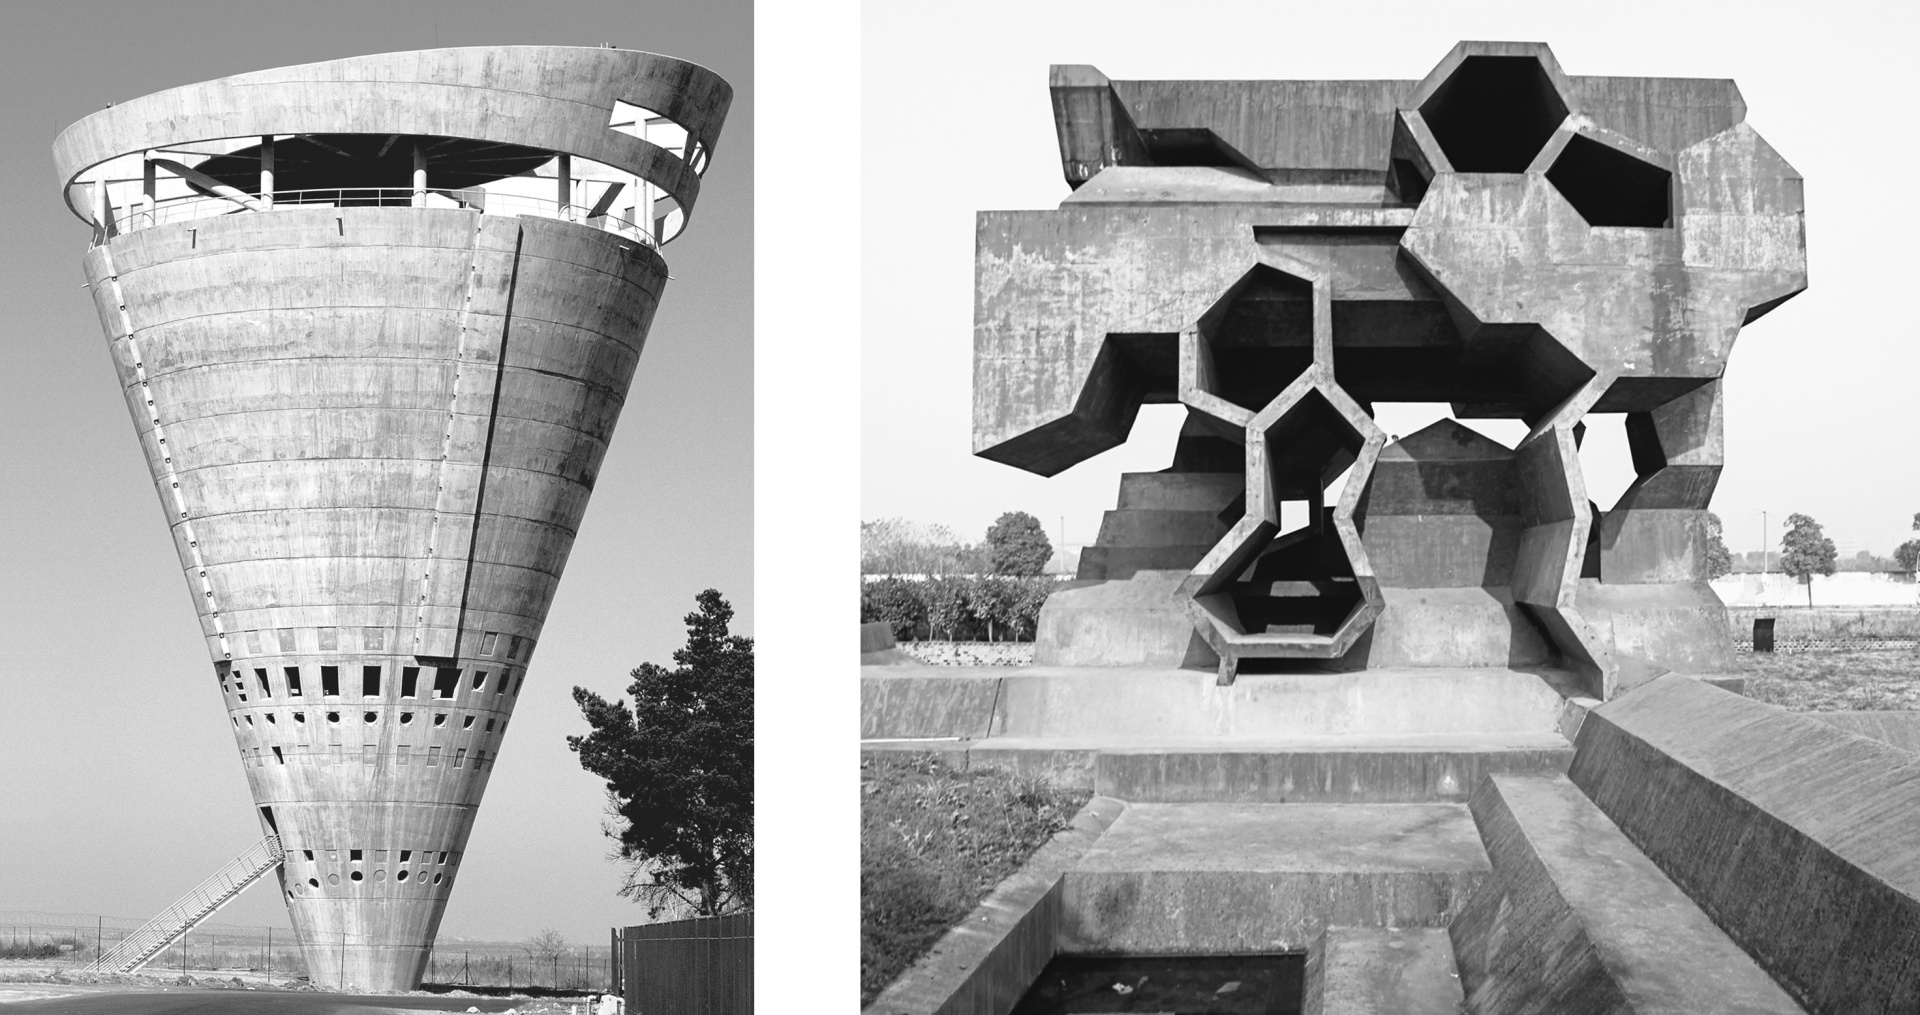 rand Central Water Tower, GAPP Architects & Urban Designers, Midrand, South Afica, 1996 and (right) Reading Pavilion, Jinhua Architecture Park by Herzog & de Meuron, Jinhua, China, 2006